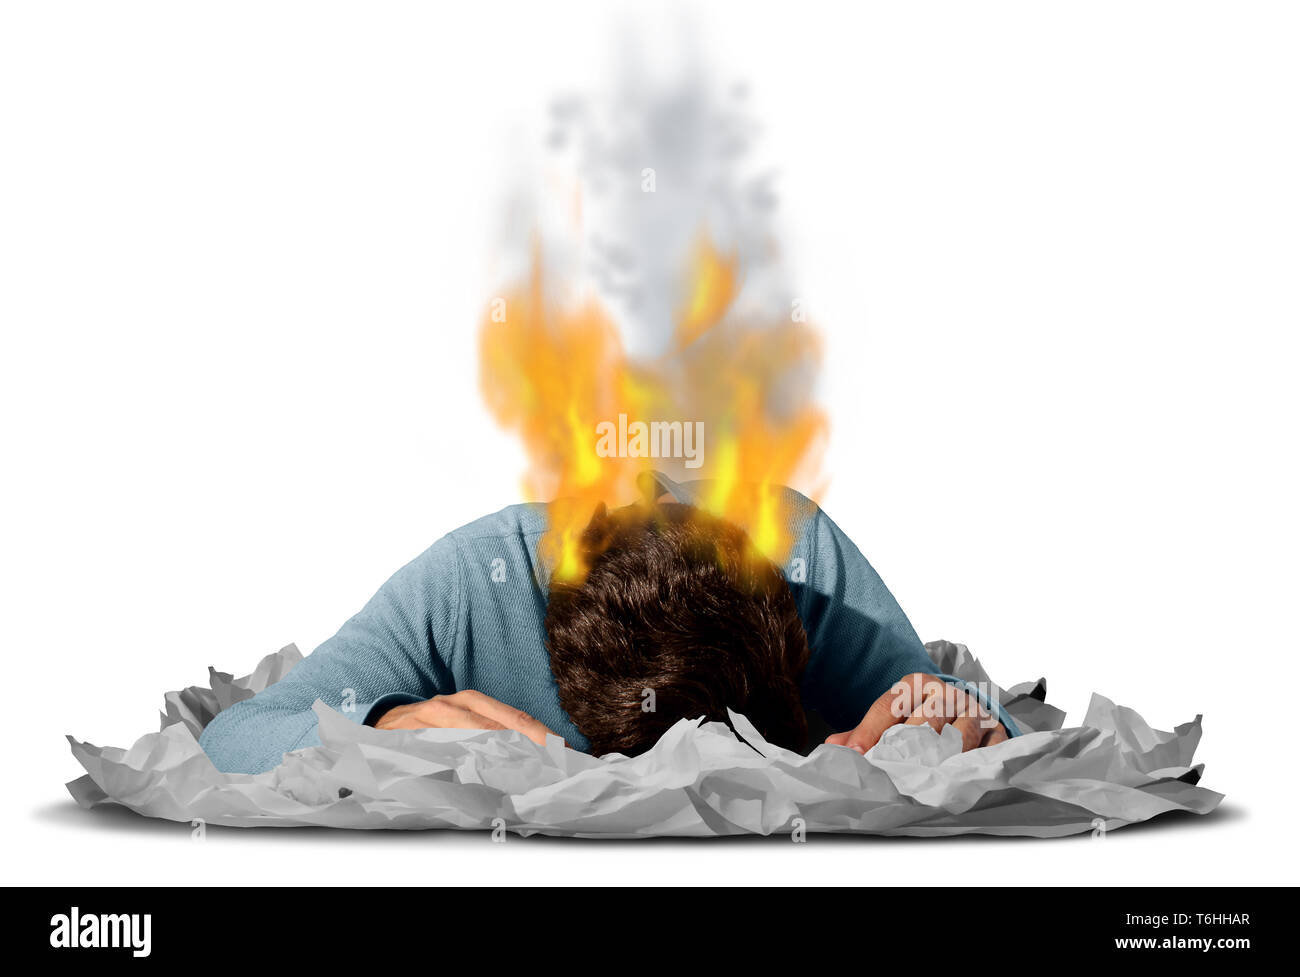 Business burn out as an overworked employee exhausted with career burnout as a work concept for overloaded workers as a composite. Stock Photo